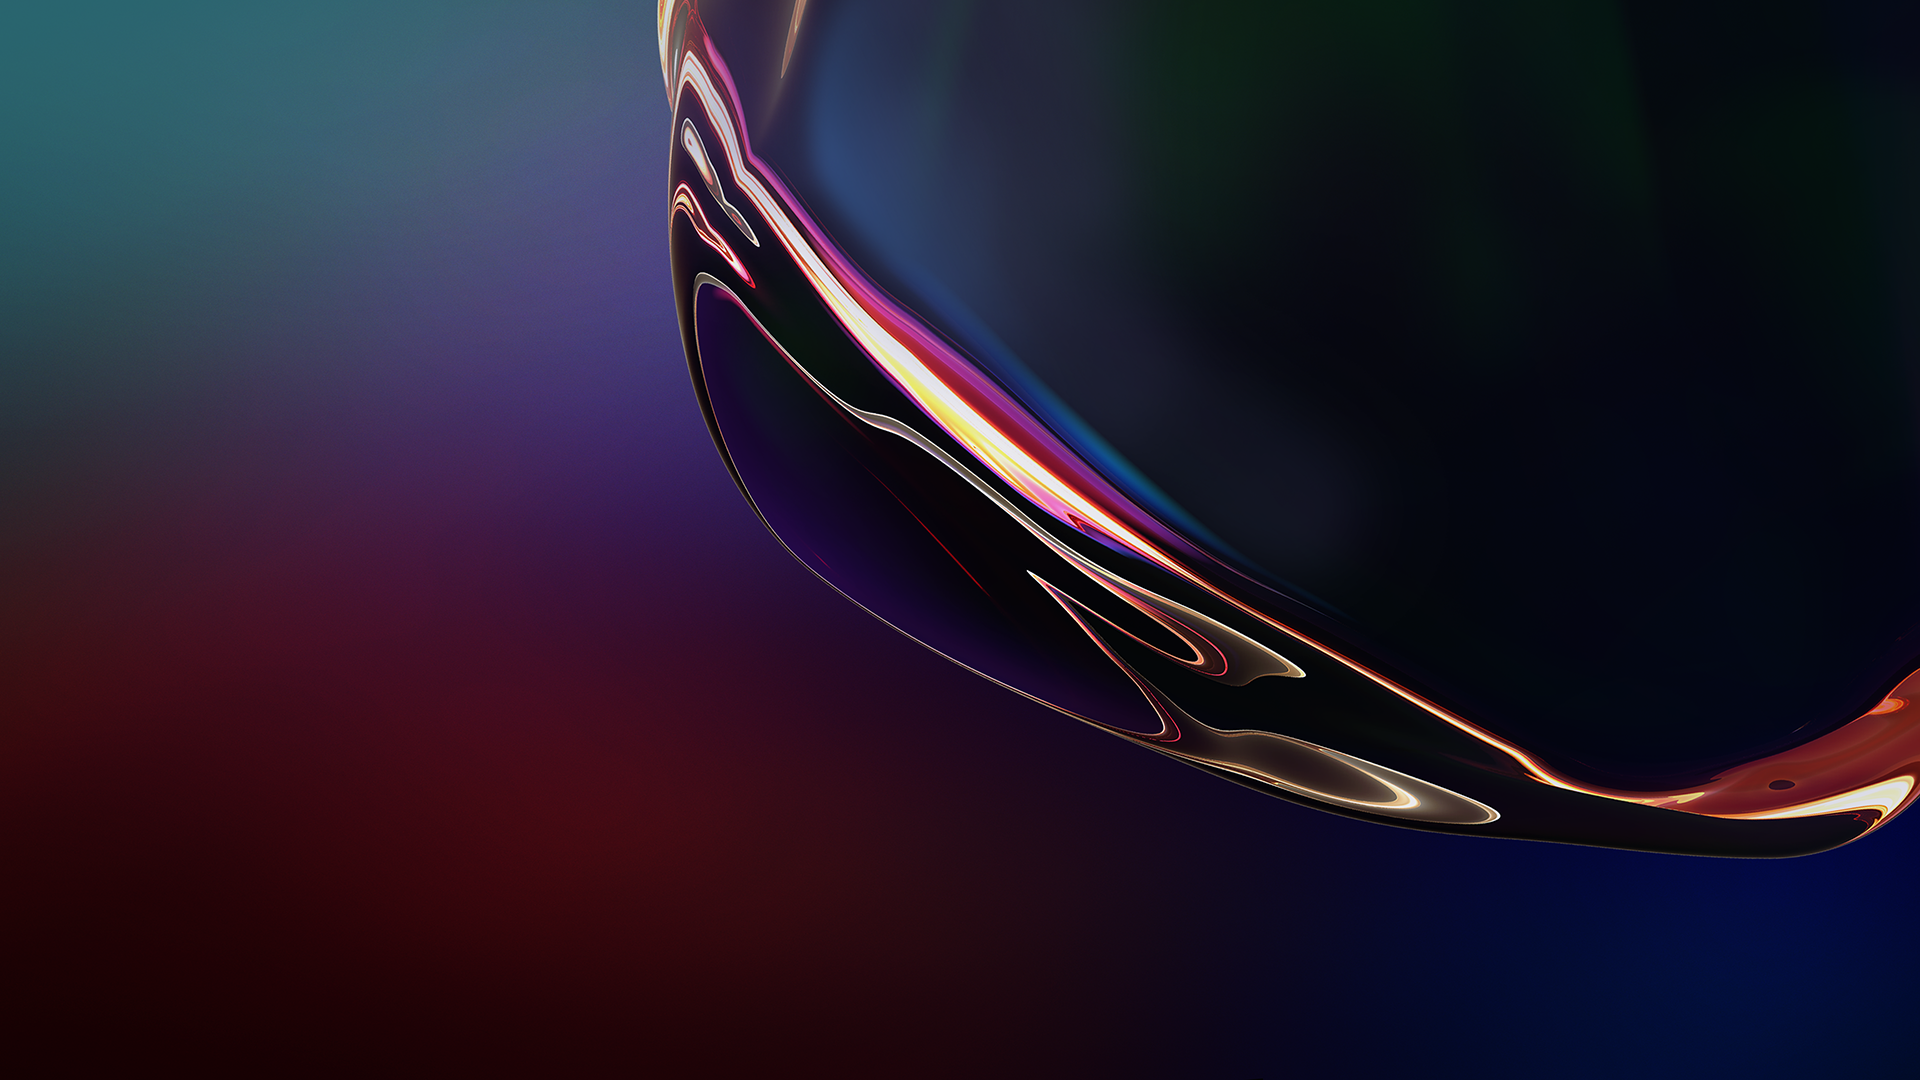 For anyone interested, here's the stock wallpaper that comes with the Galaxy Book Flex